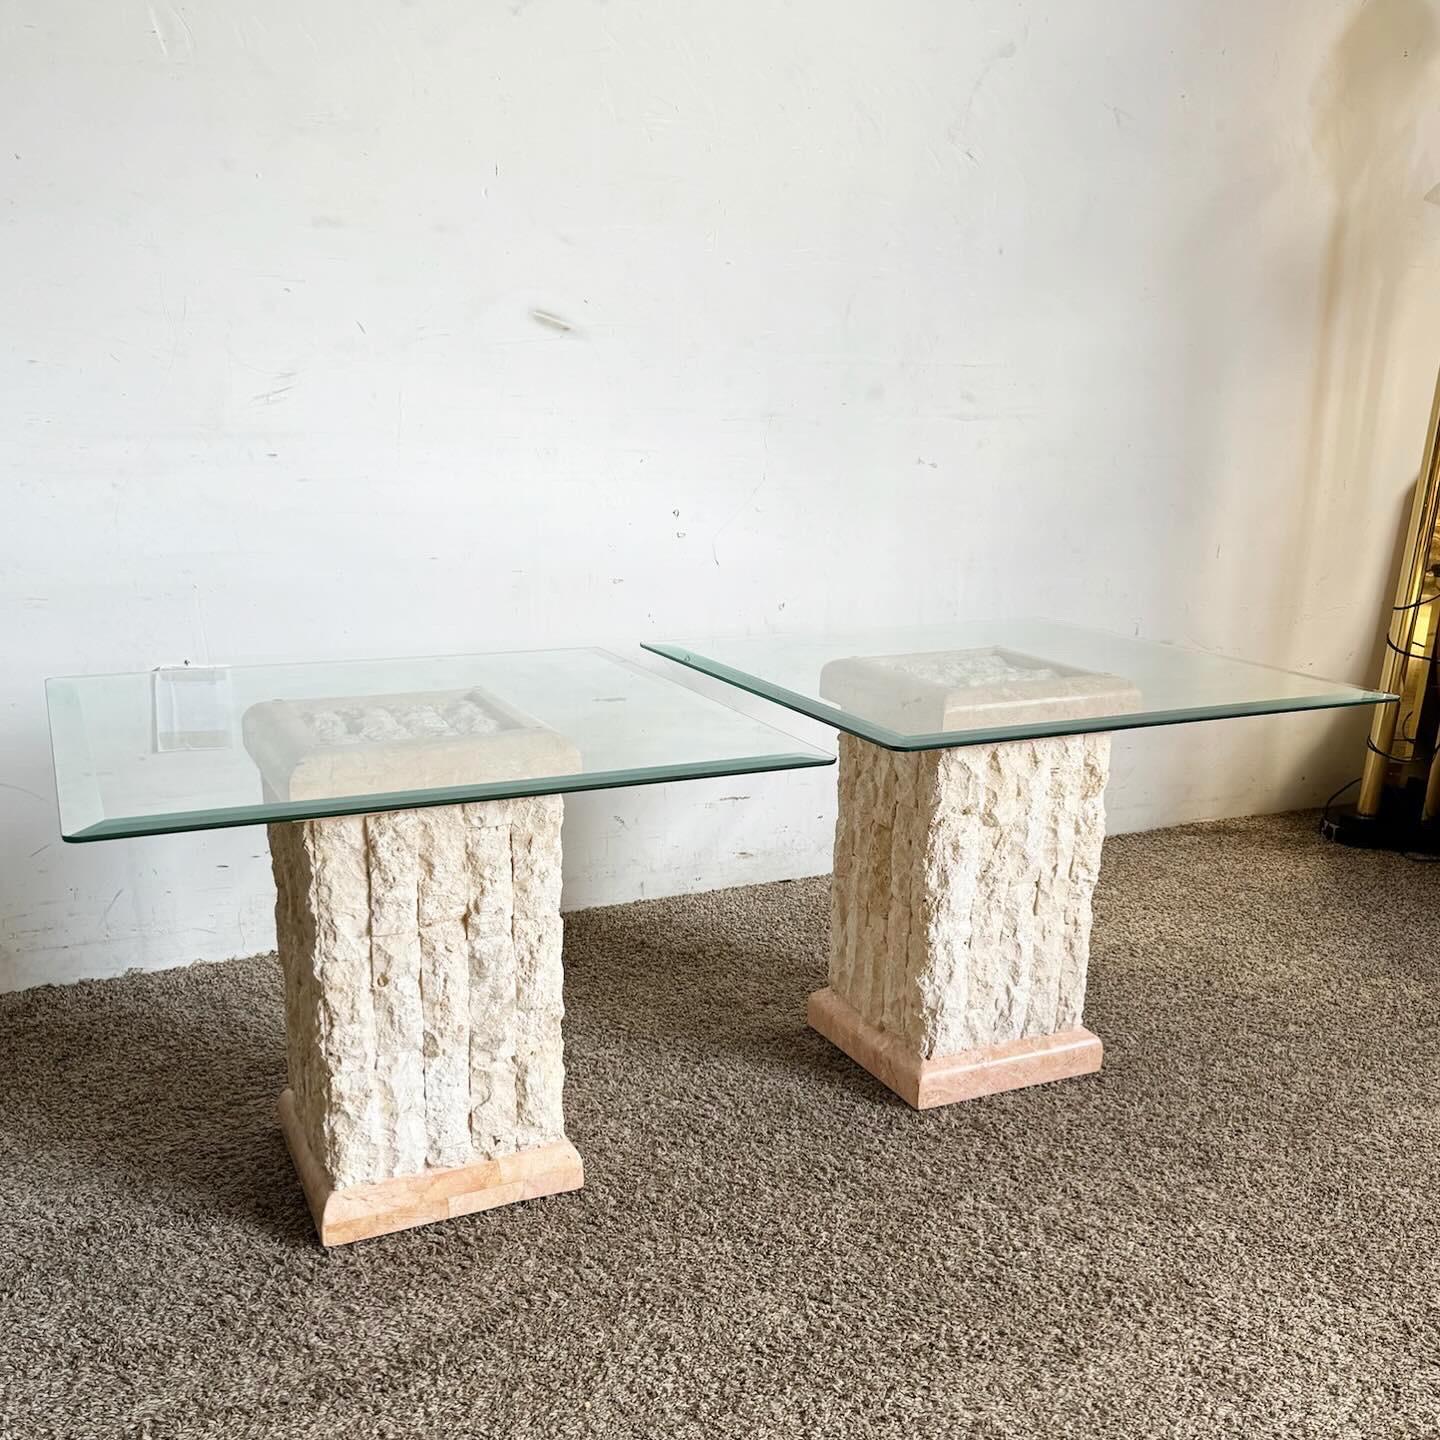 20th Century Postmodern Pink & Beige Tessellated Stone Beveled Glass Top Side Tables - a Pair For Sale